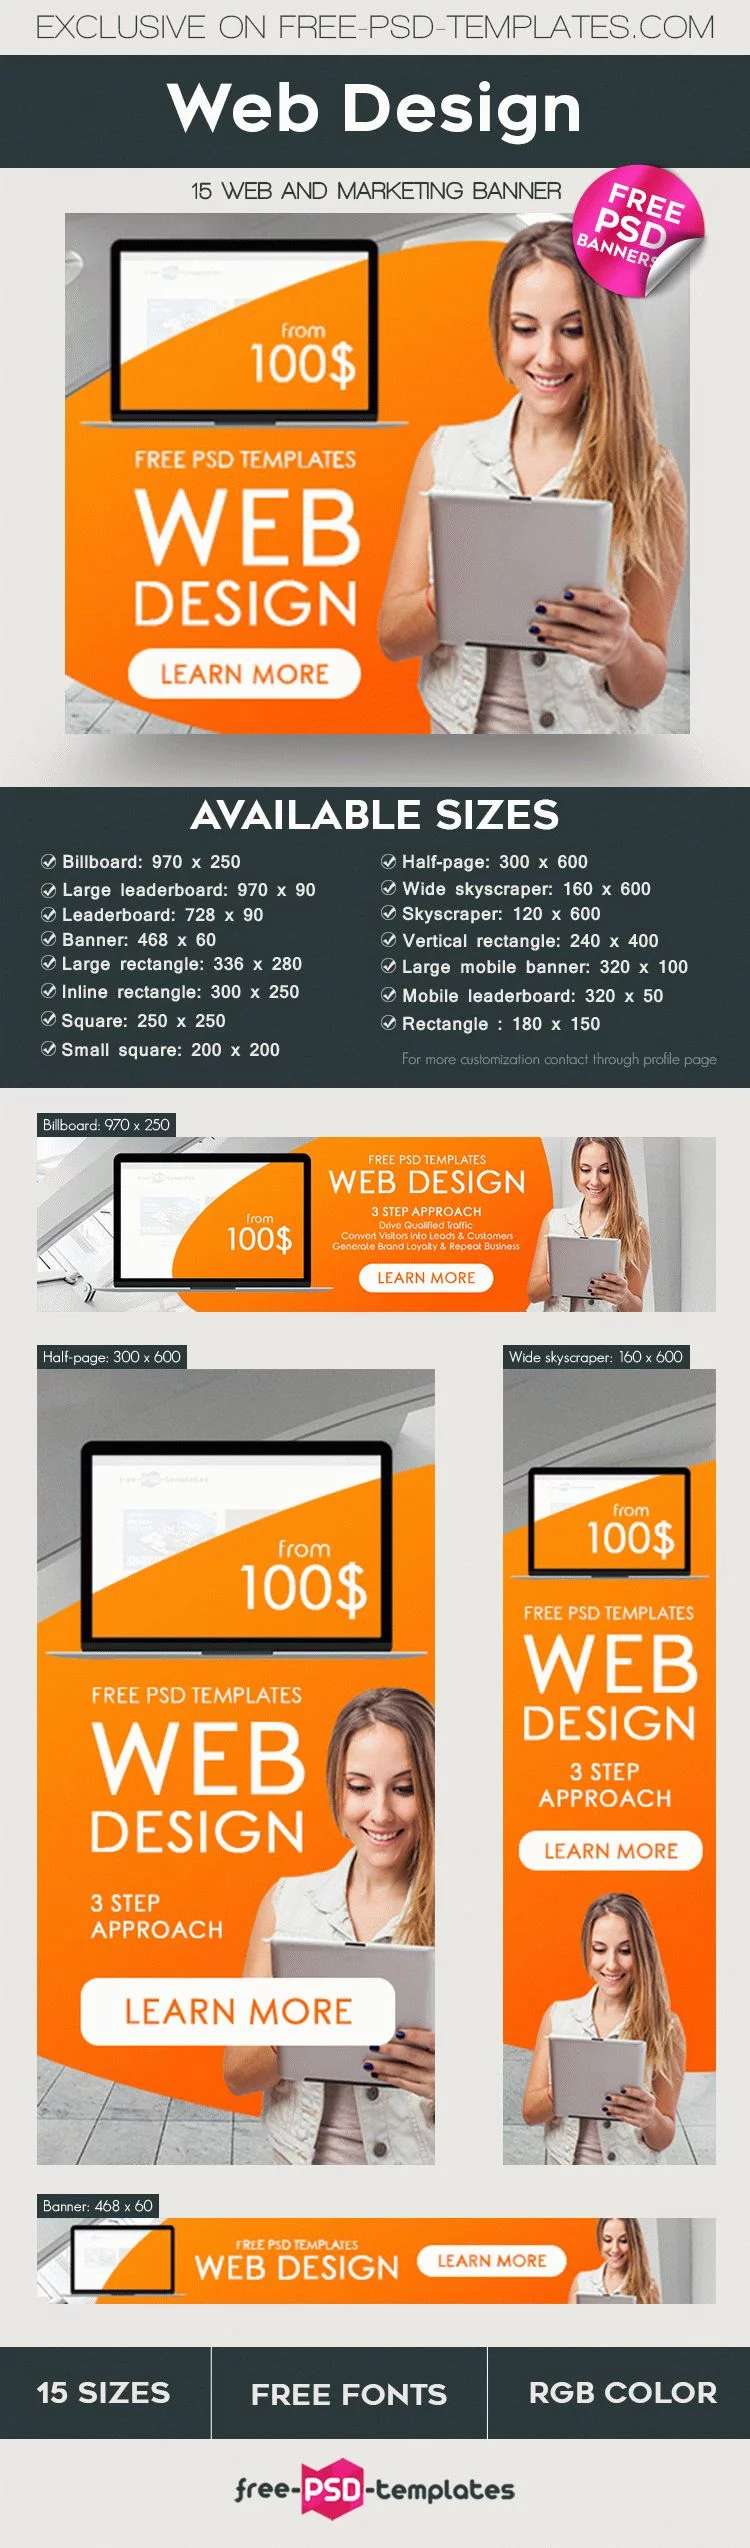 15 Free Web Design Banners Collection in PSD